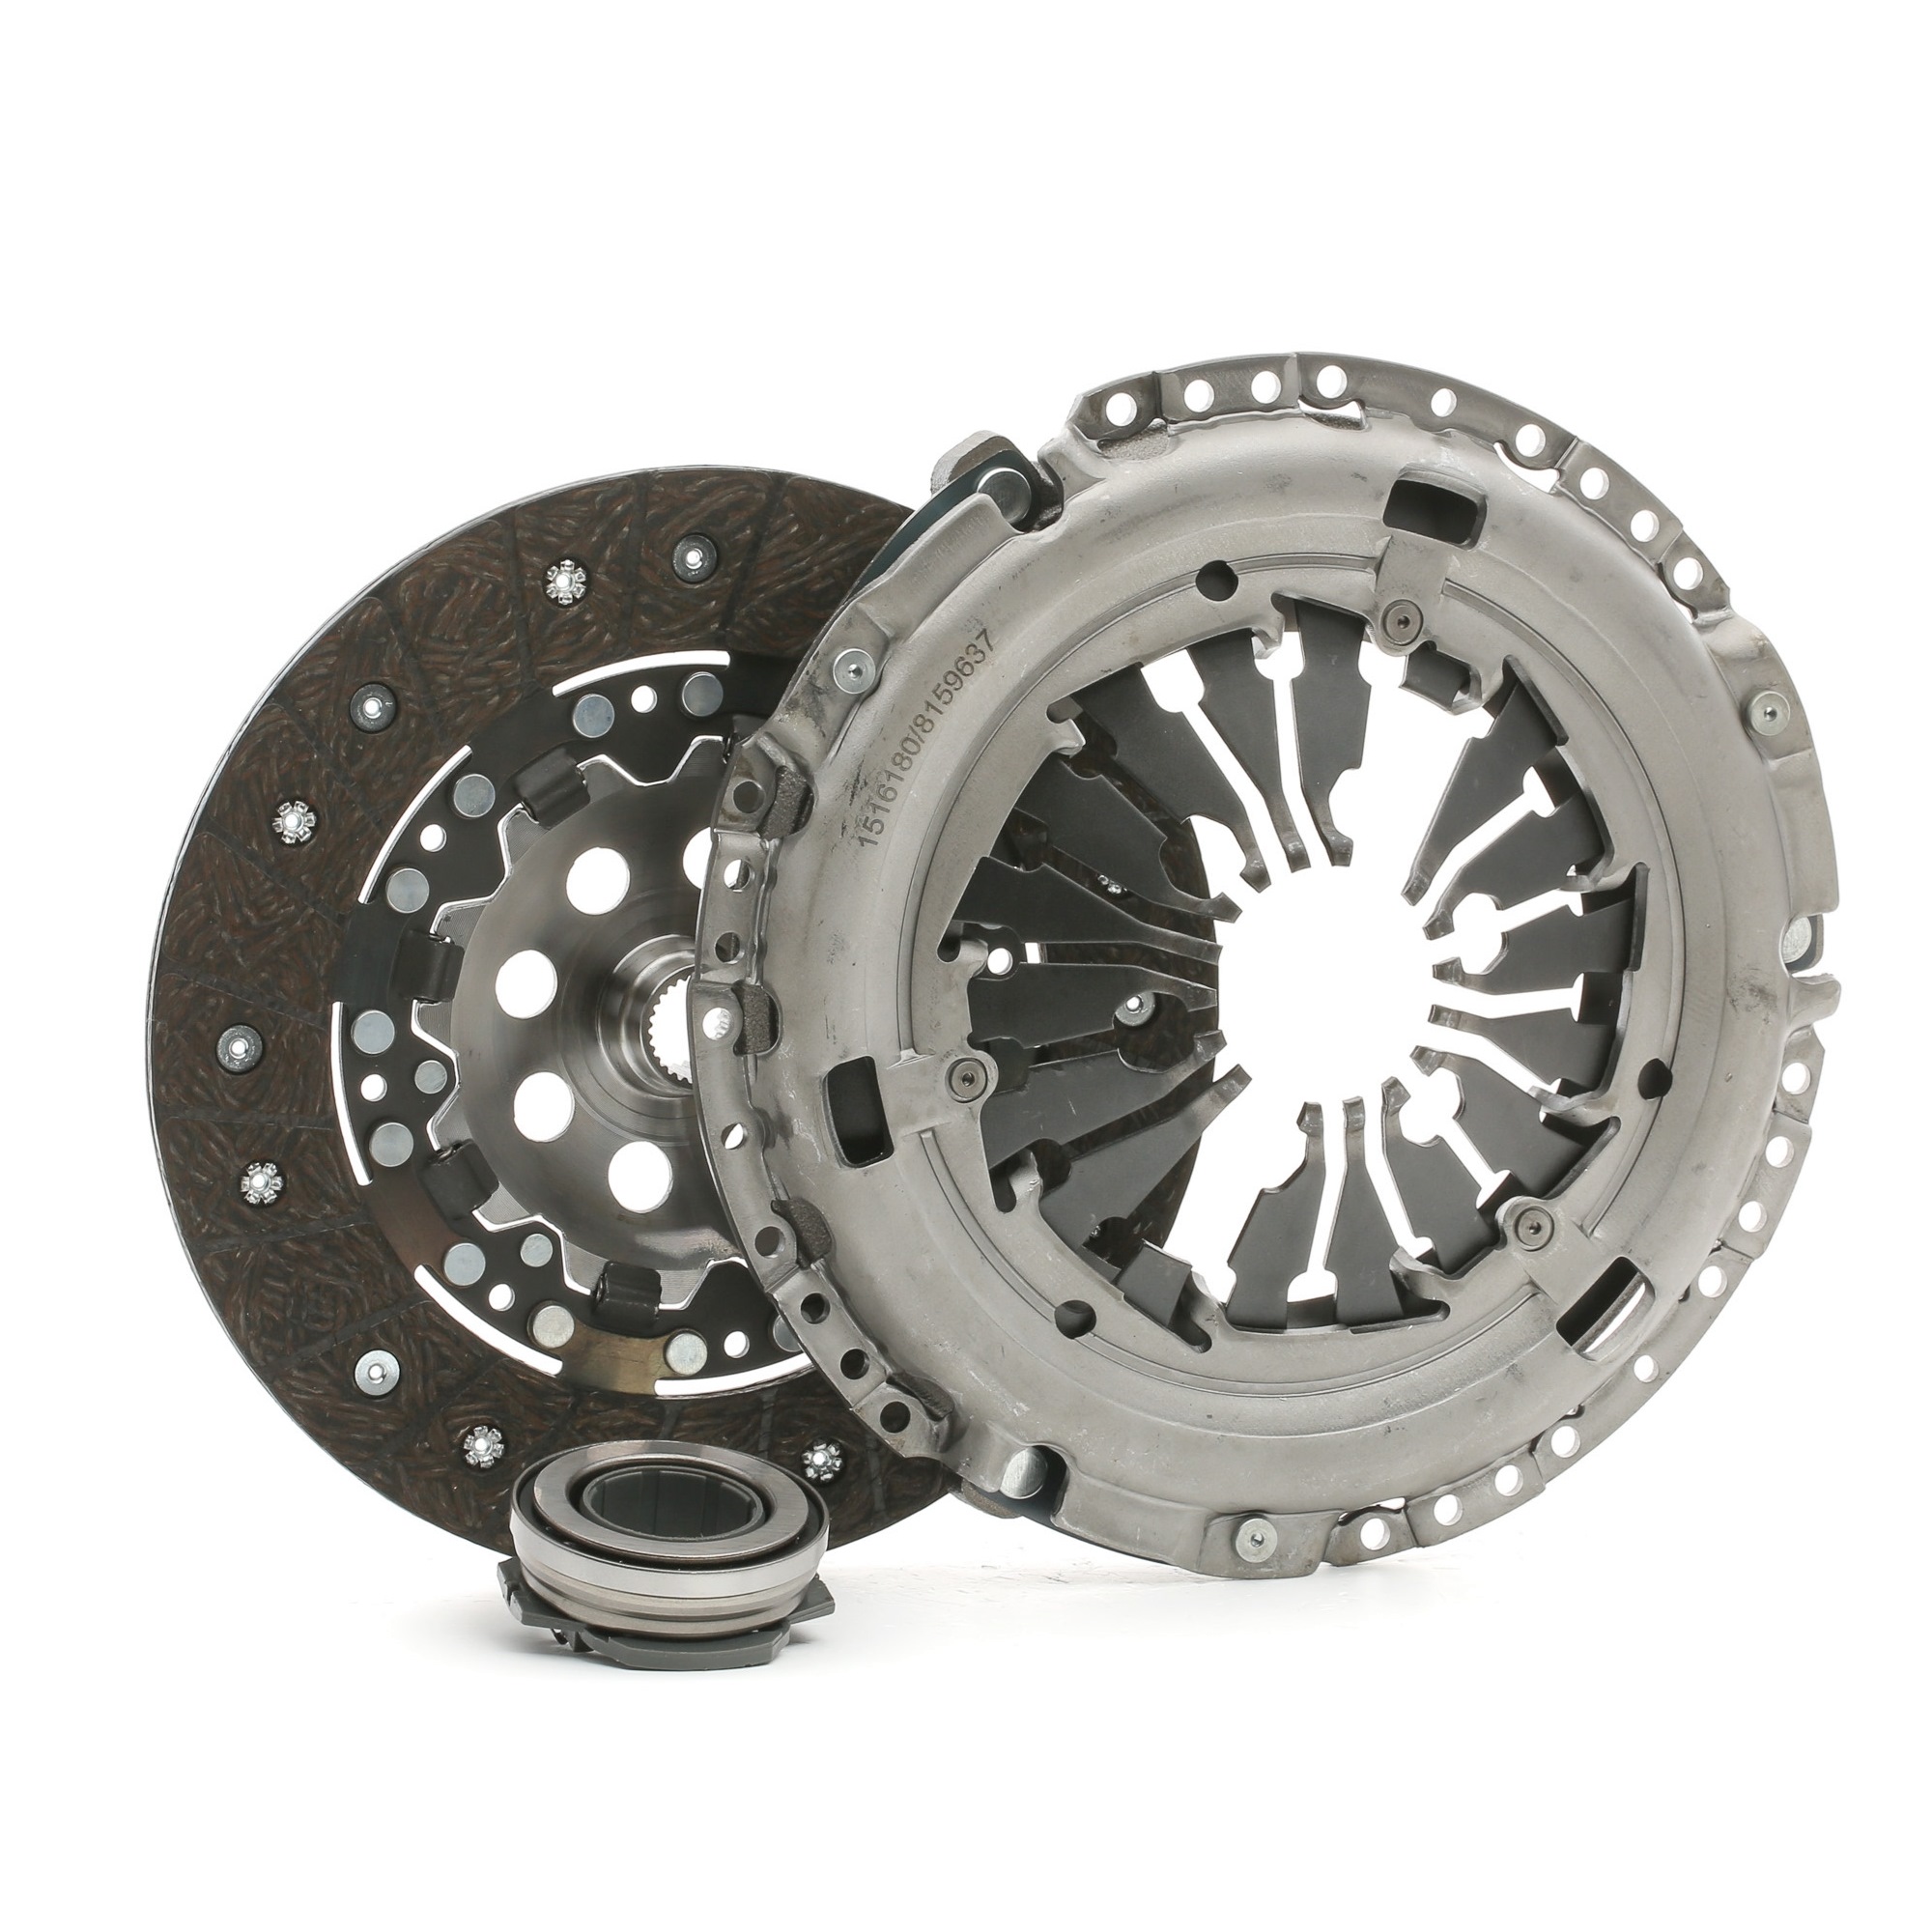 RIDEX 479C0024 Clutch kit for engines with dual-mass flywheel, with clutch release bearing, with clutch disc, Check and replace dual-mass flywheel if necessary., 230mm